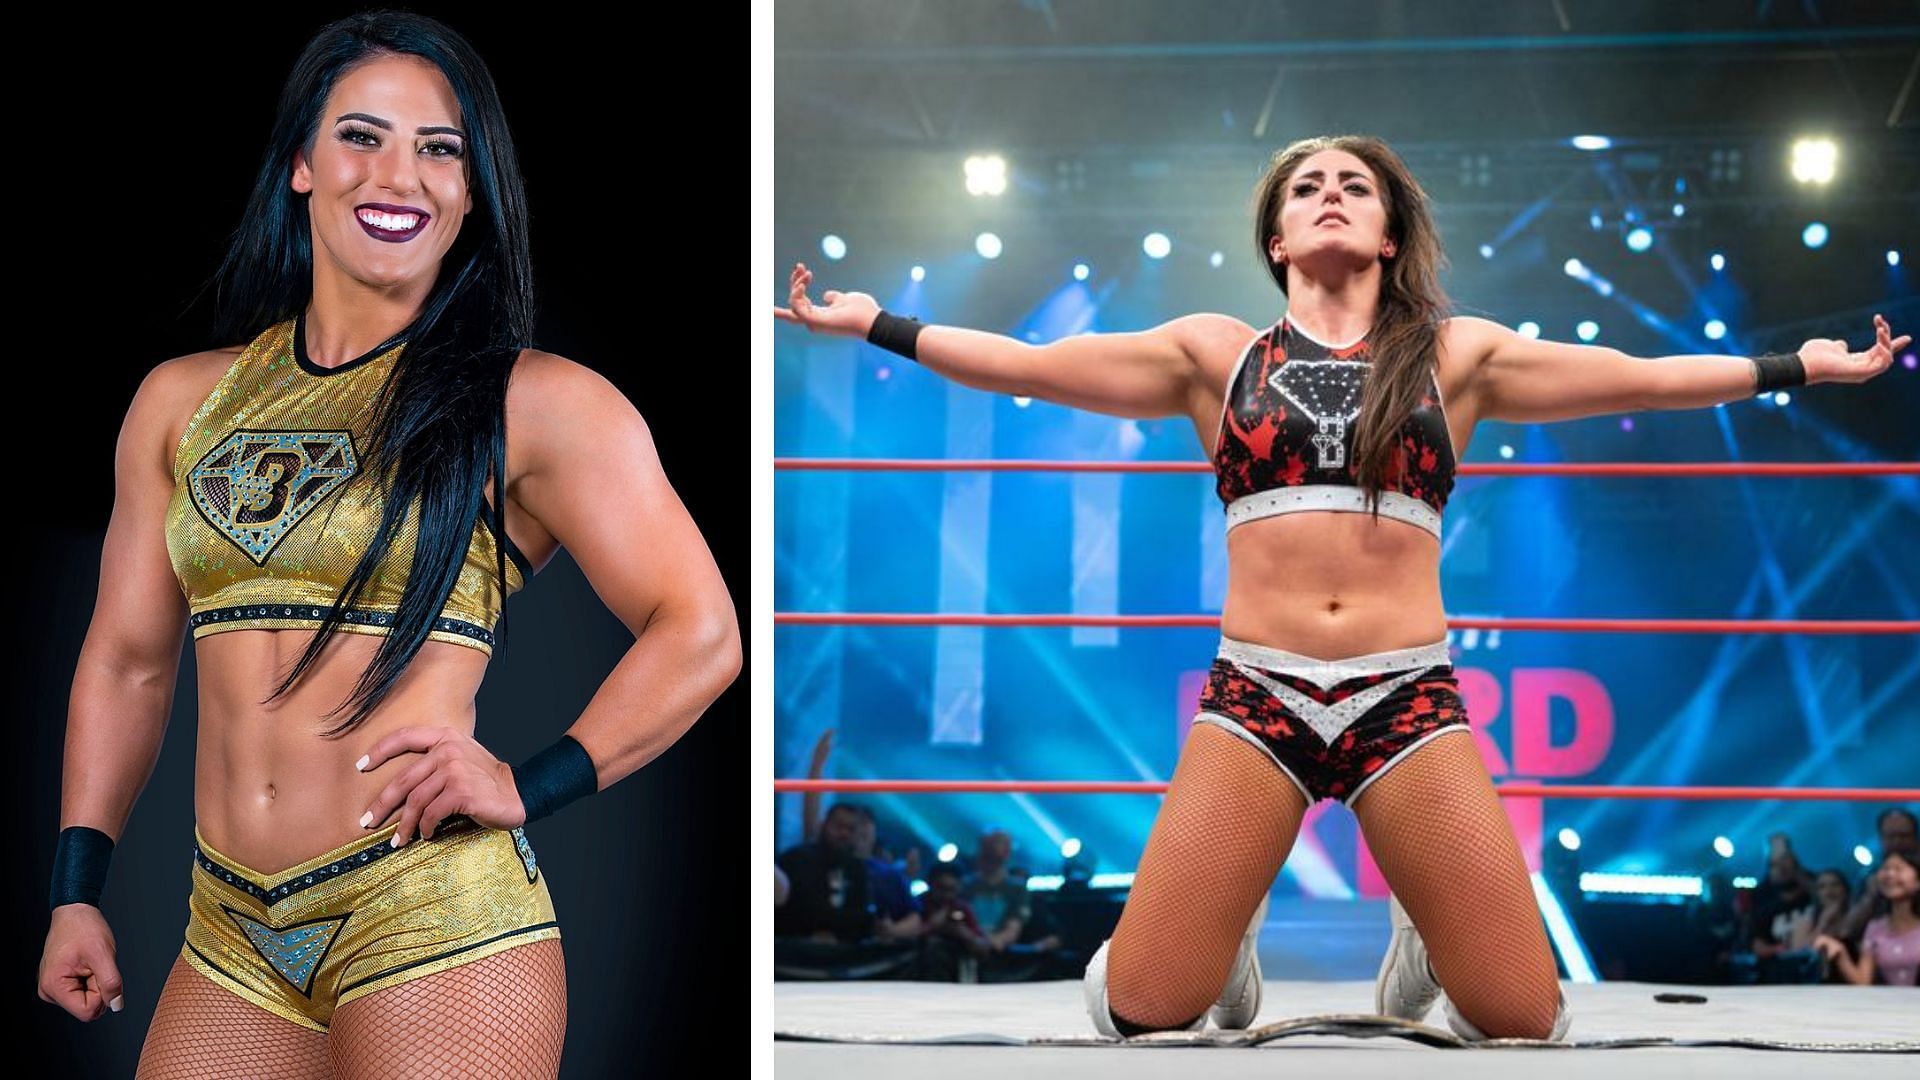 Tessa Blanchard would like to face a WWE Superstar